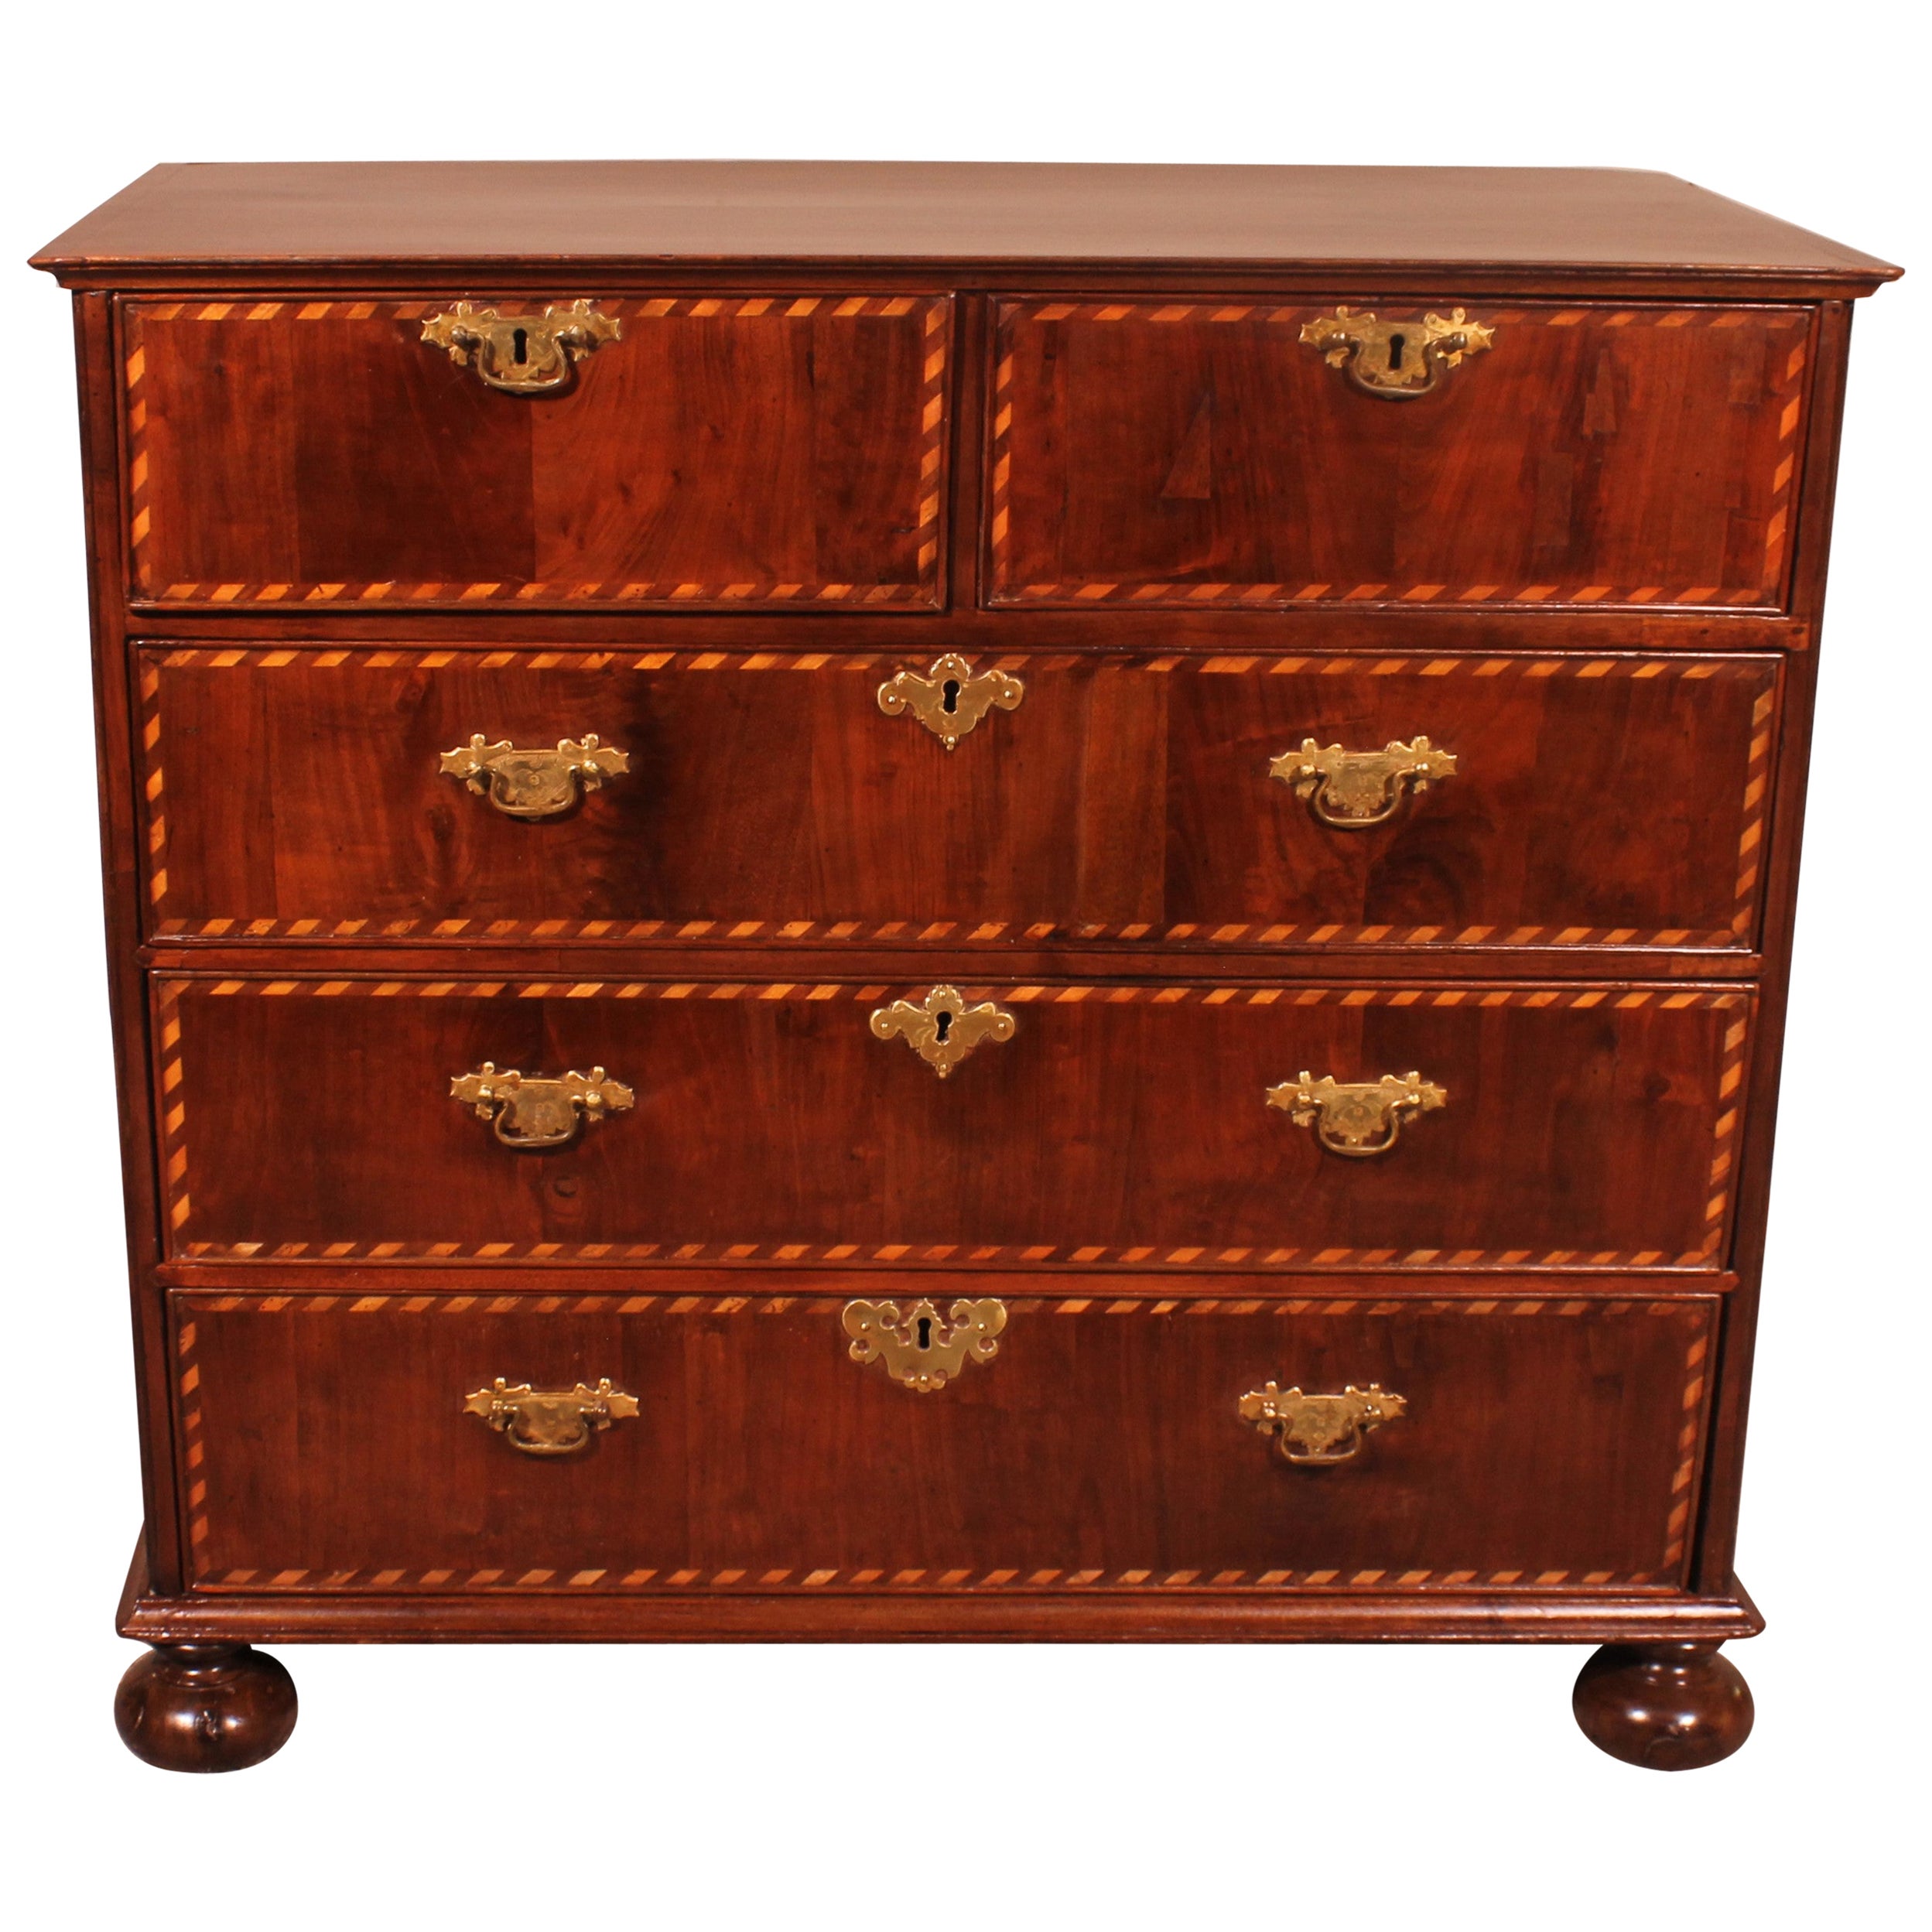 Queen Anne Chest of Drawers / Commode in Walnut circa 1700